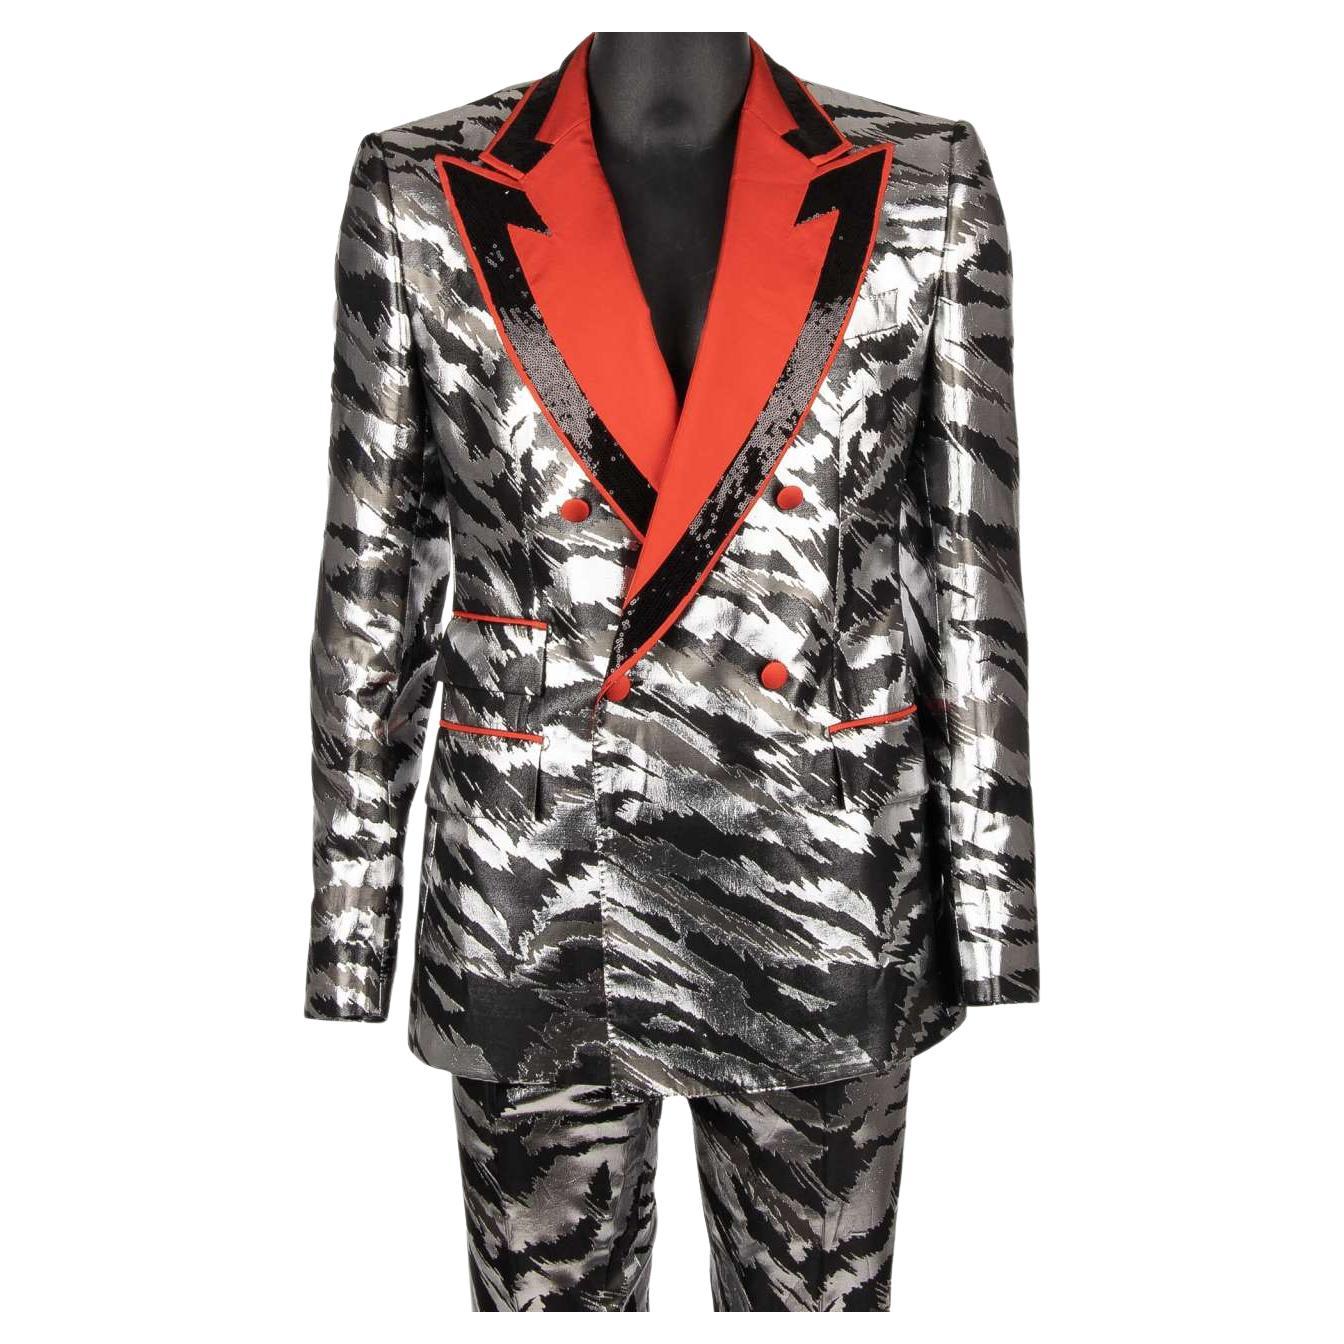 D&G Sequin Jacquard Double breasted Suit Silver Black Red 50 US 40 M L For Sale